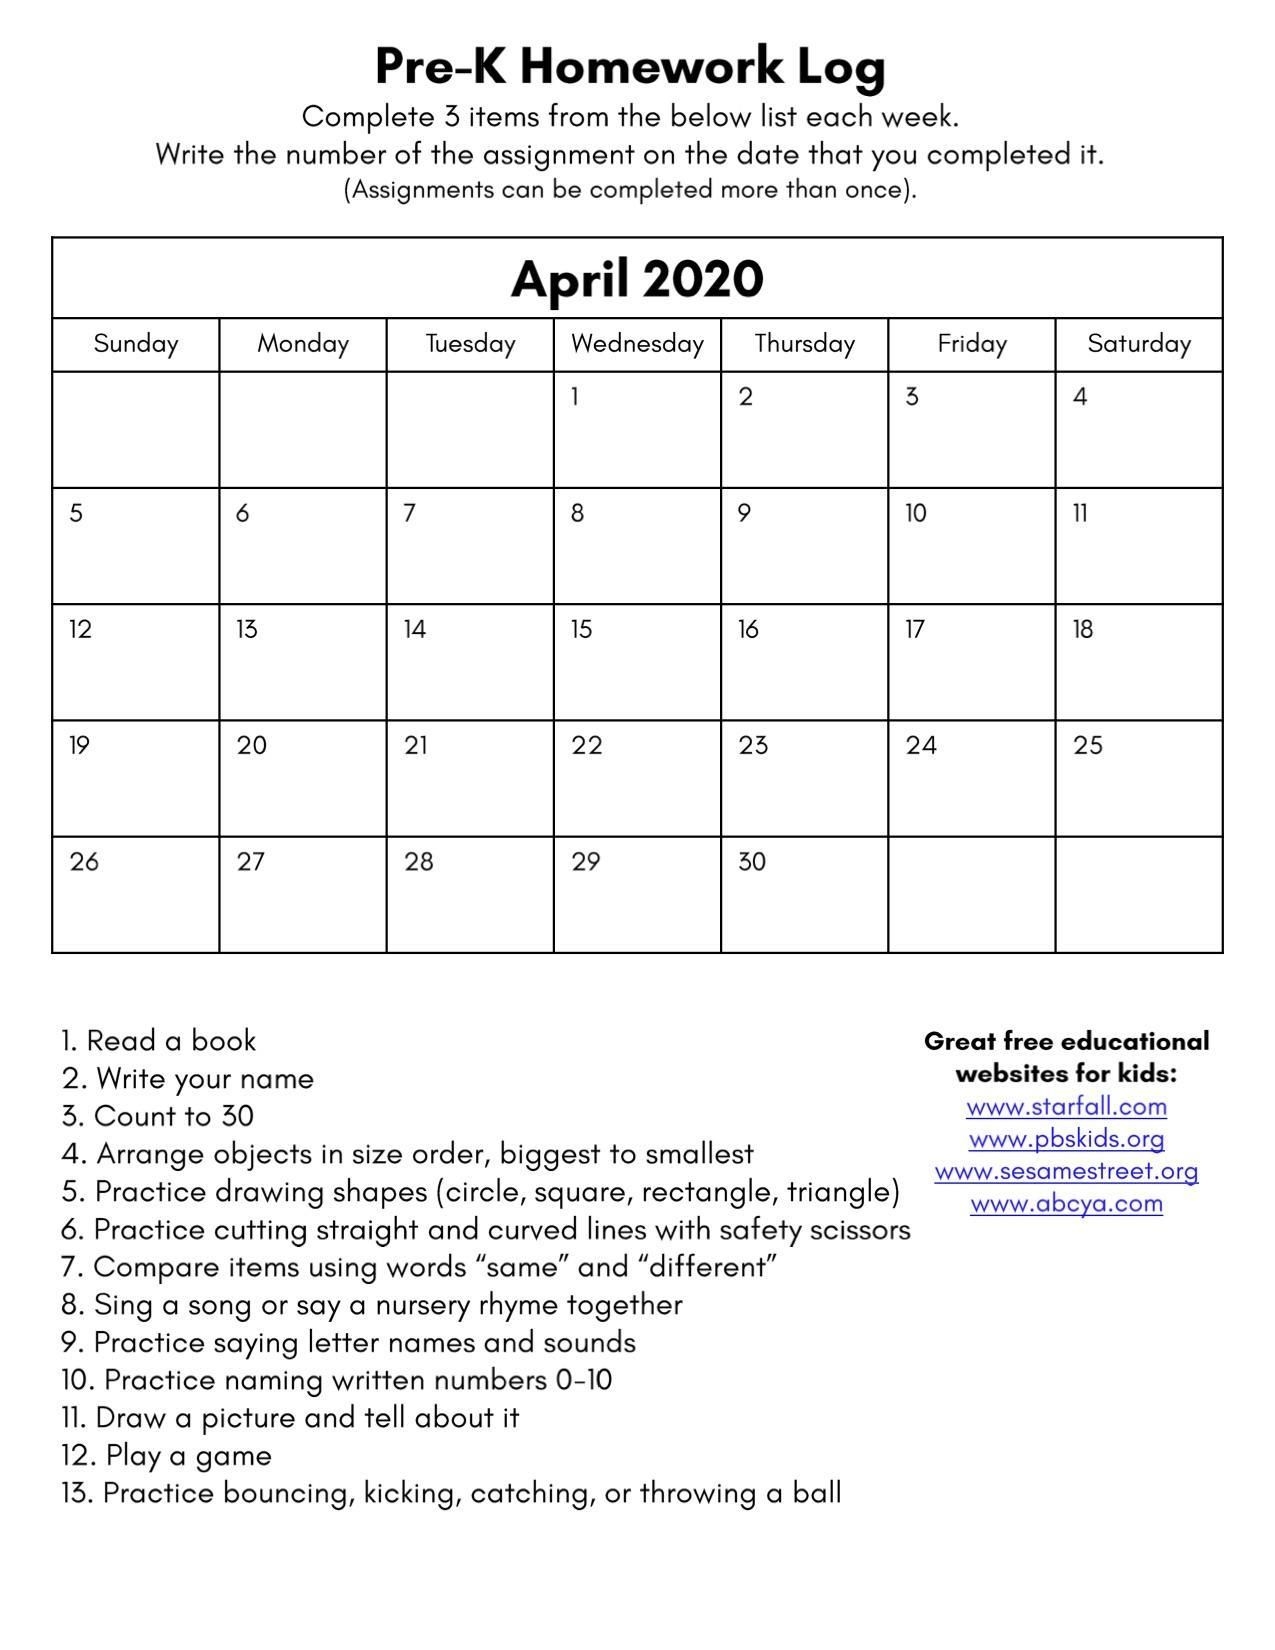 Monthly Homework Choice Calendar And Weekly Enrichment